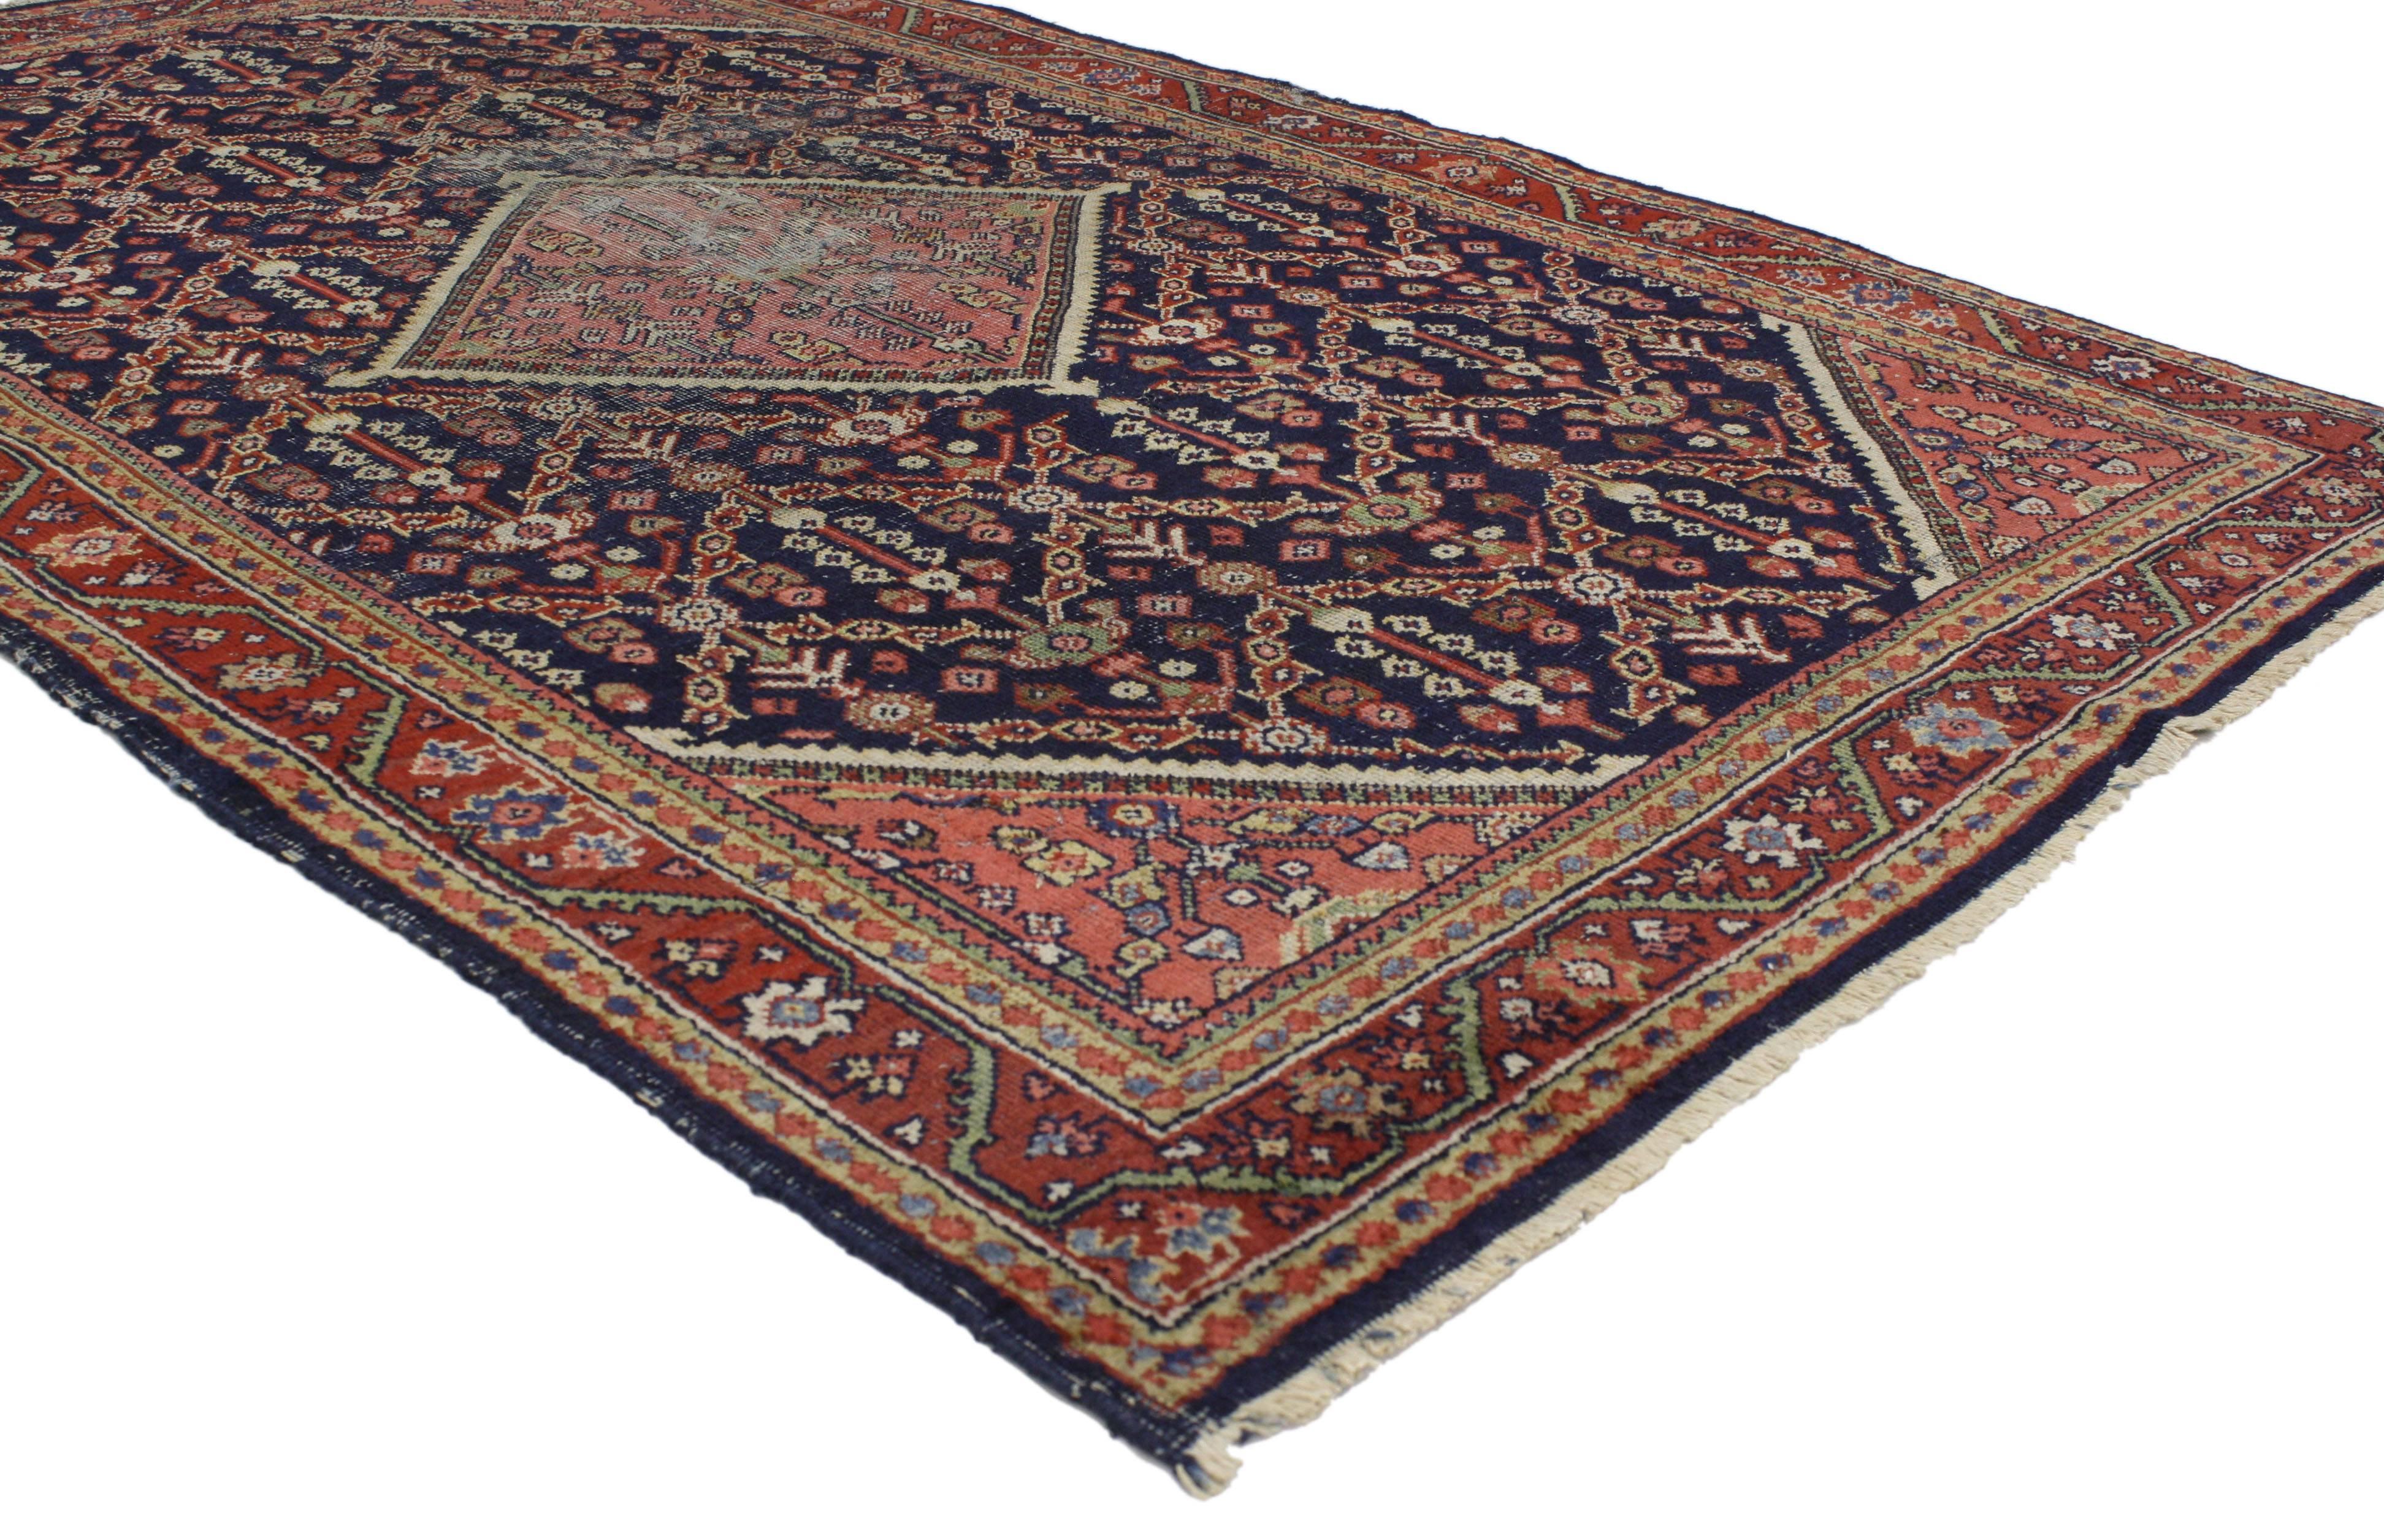 77011 Distressed Antique Persian Mahal Rug with Modern Rustic English Traditional Style 04'05 x 06'05. With a timeless design and nostalgic charm, this hand knotted wool distressed antique Persian Mahal rug can beautifully blend modern, contemporary